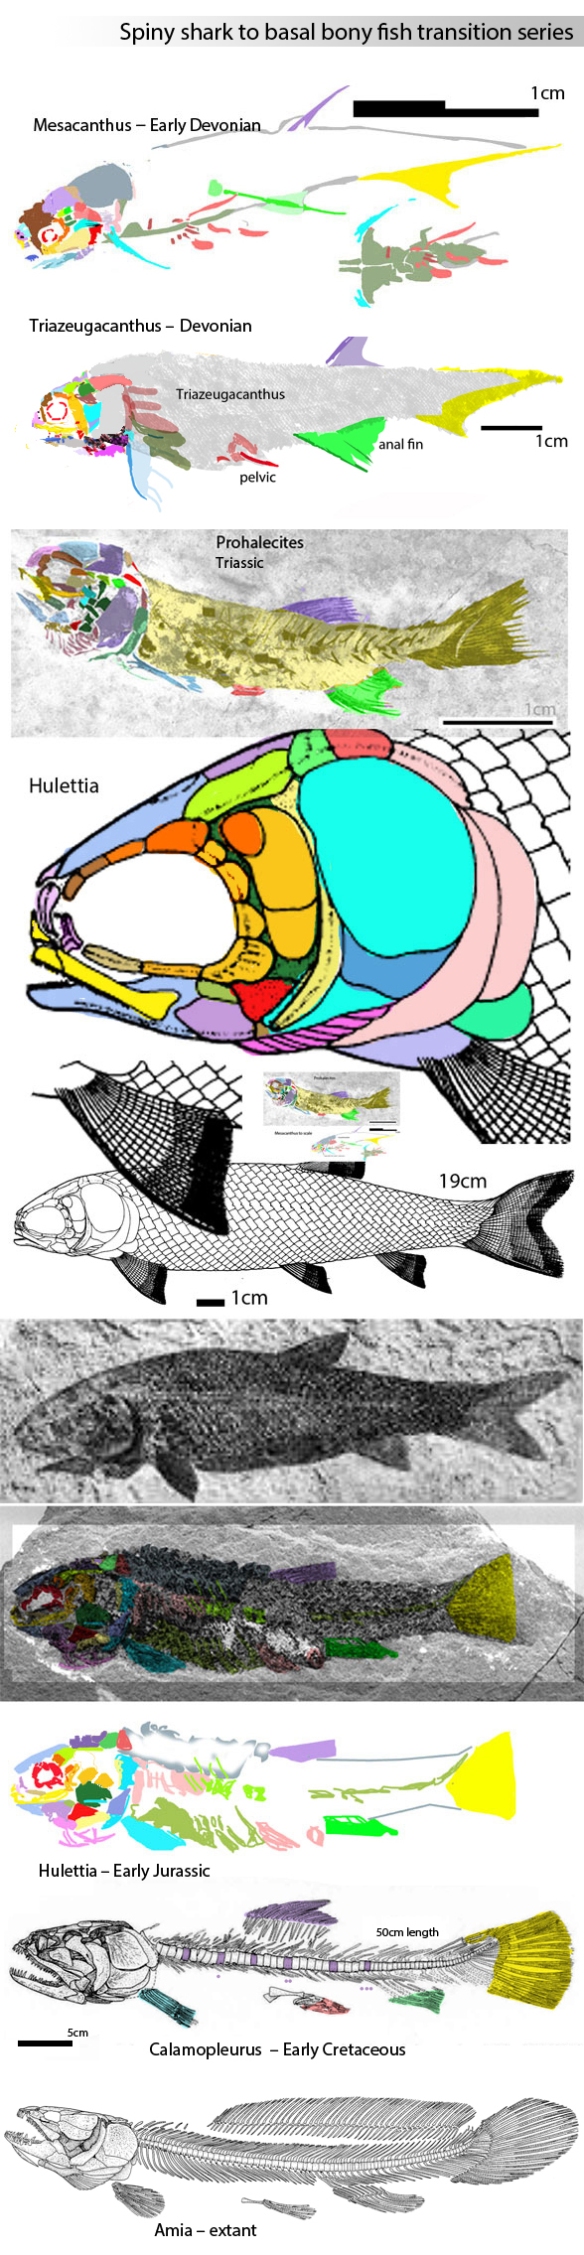 Figure 1. Two spiny sharks, Mesacanthus and Triazeugacanthus, now appear to be basal to Triassic bony fish close to Amia, the extant bowfin, illustrated here in phylogenetic order.